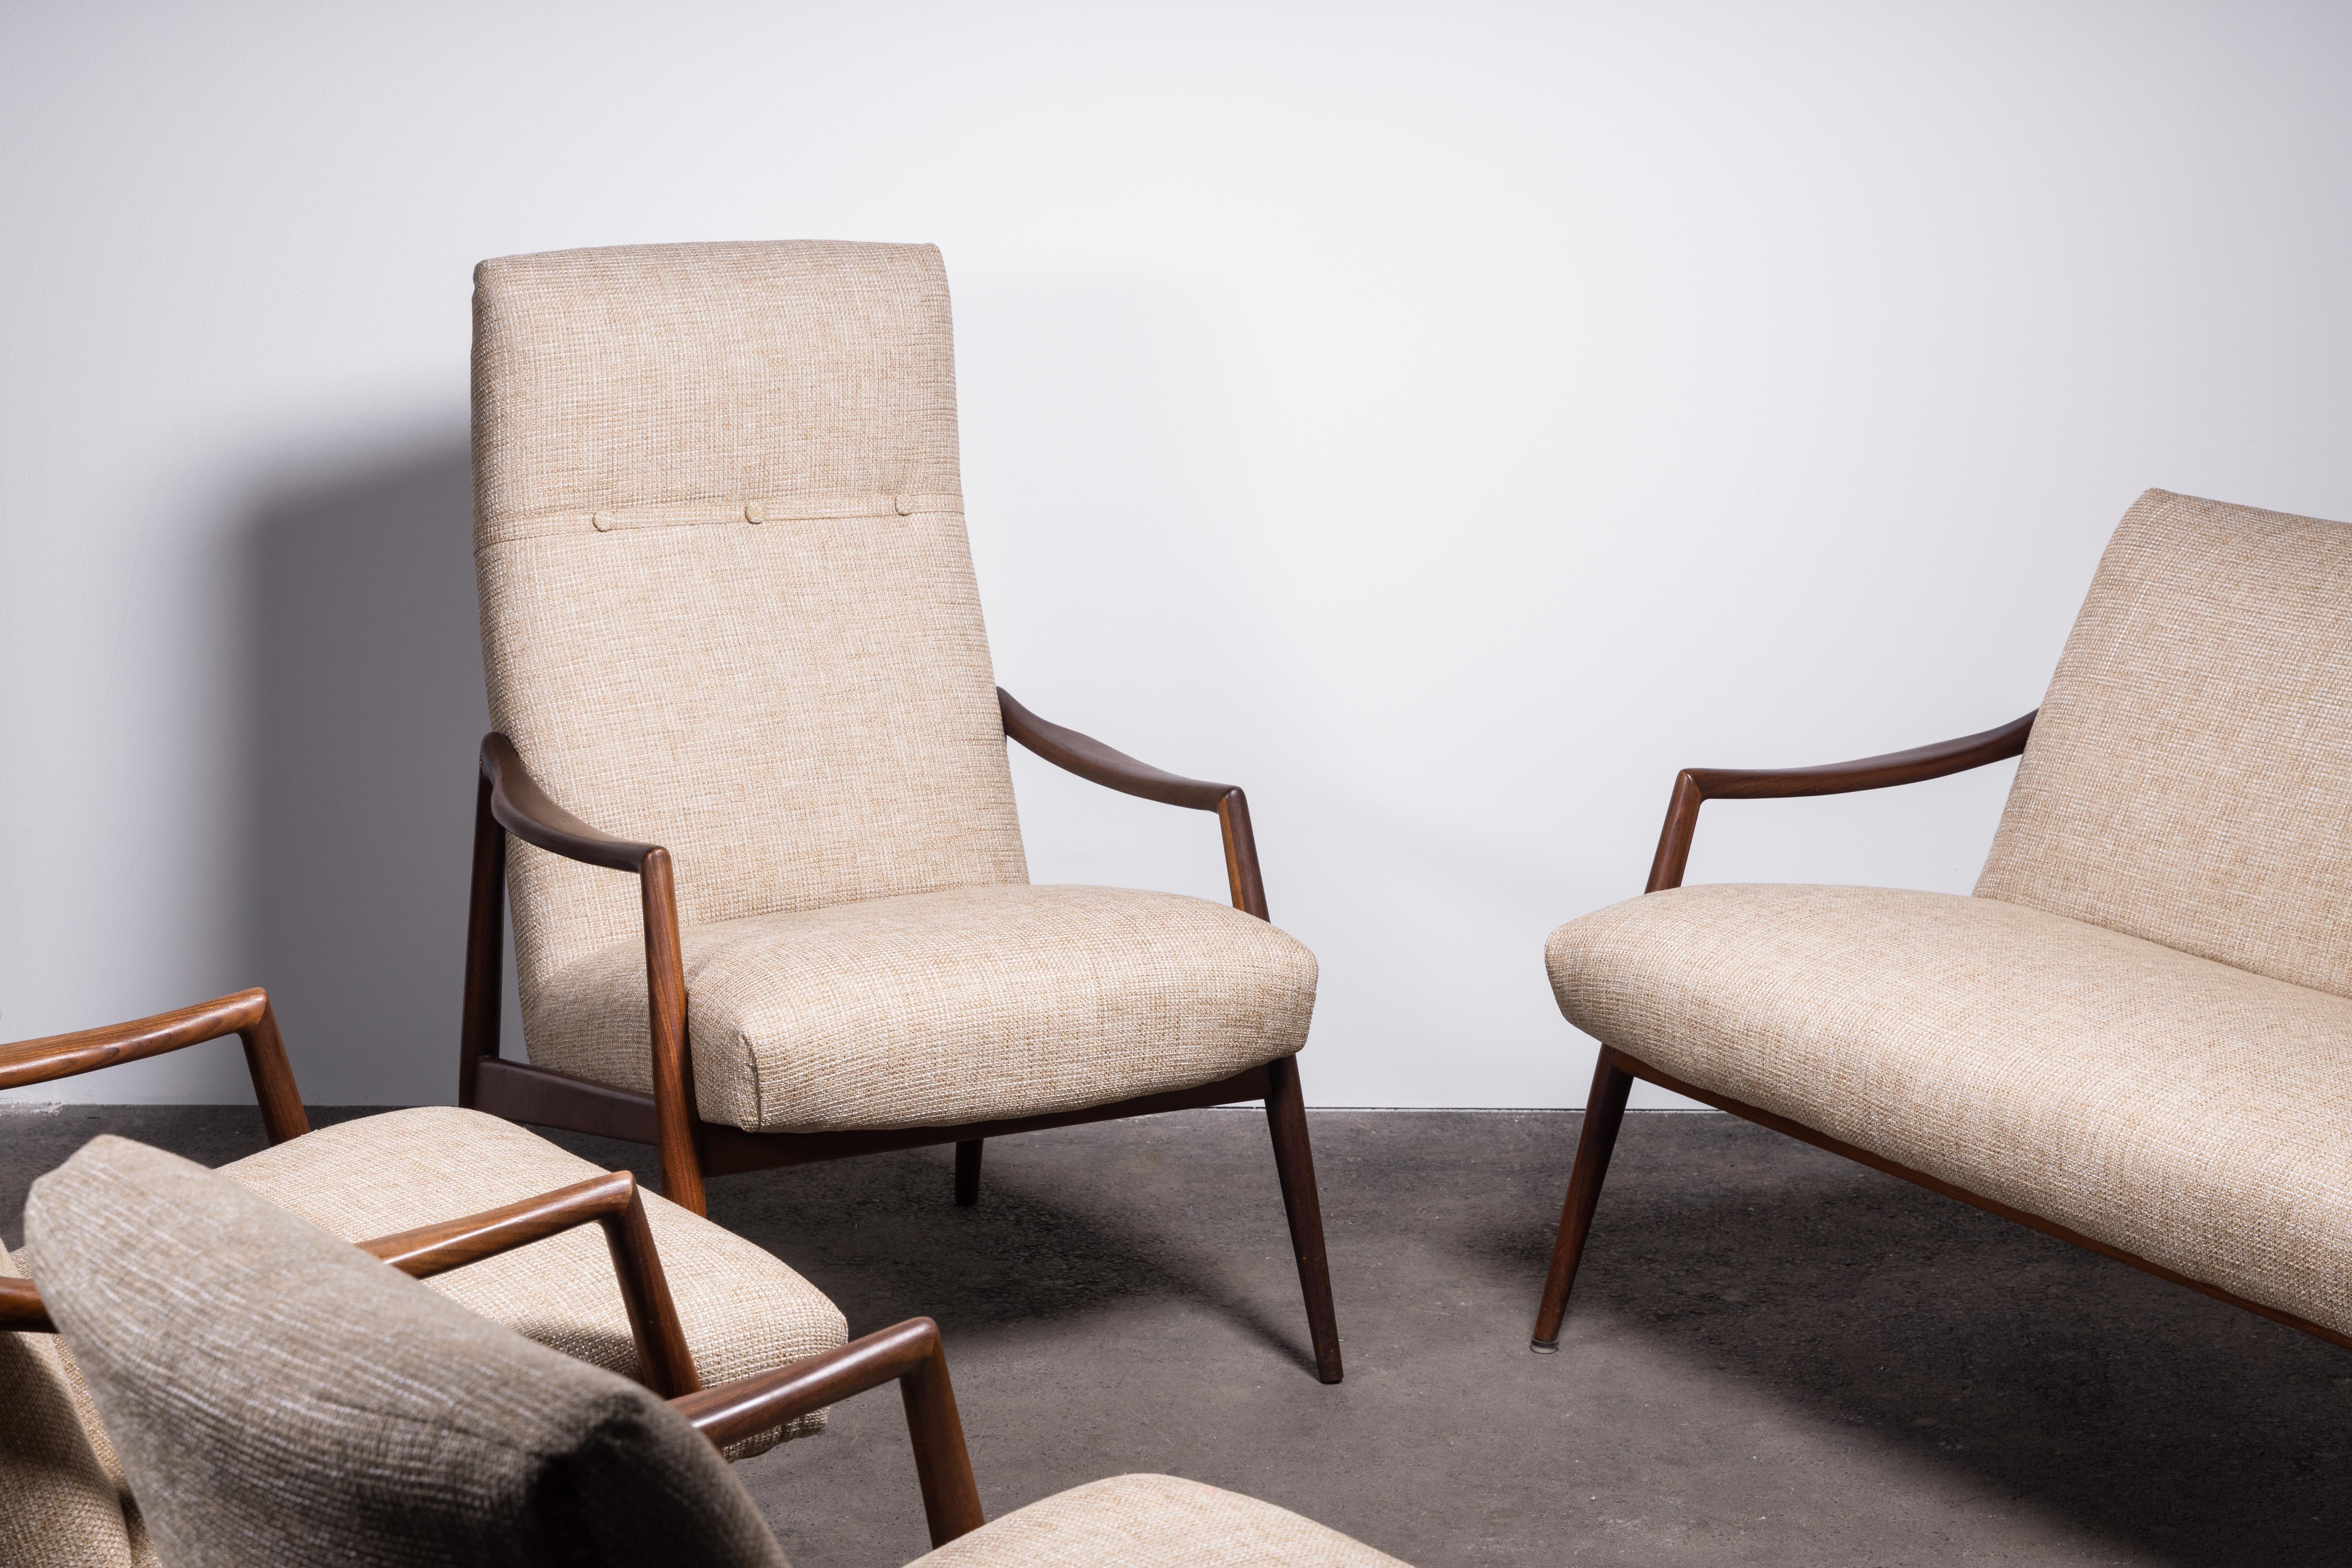 Pair of 1950s Teak Armchairs by Hartmut Lohmeyer Upholstered à la Coco Chanel 2